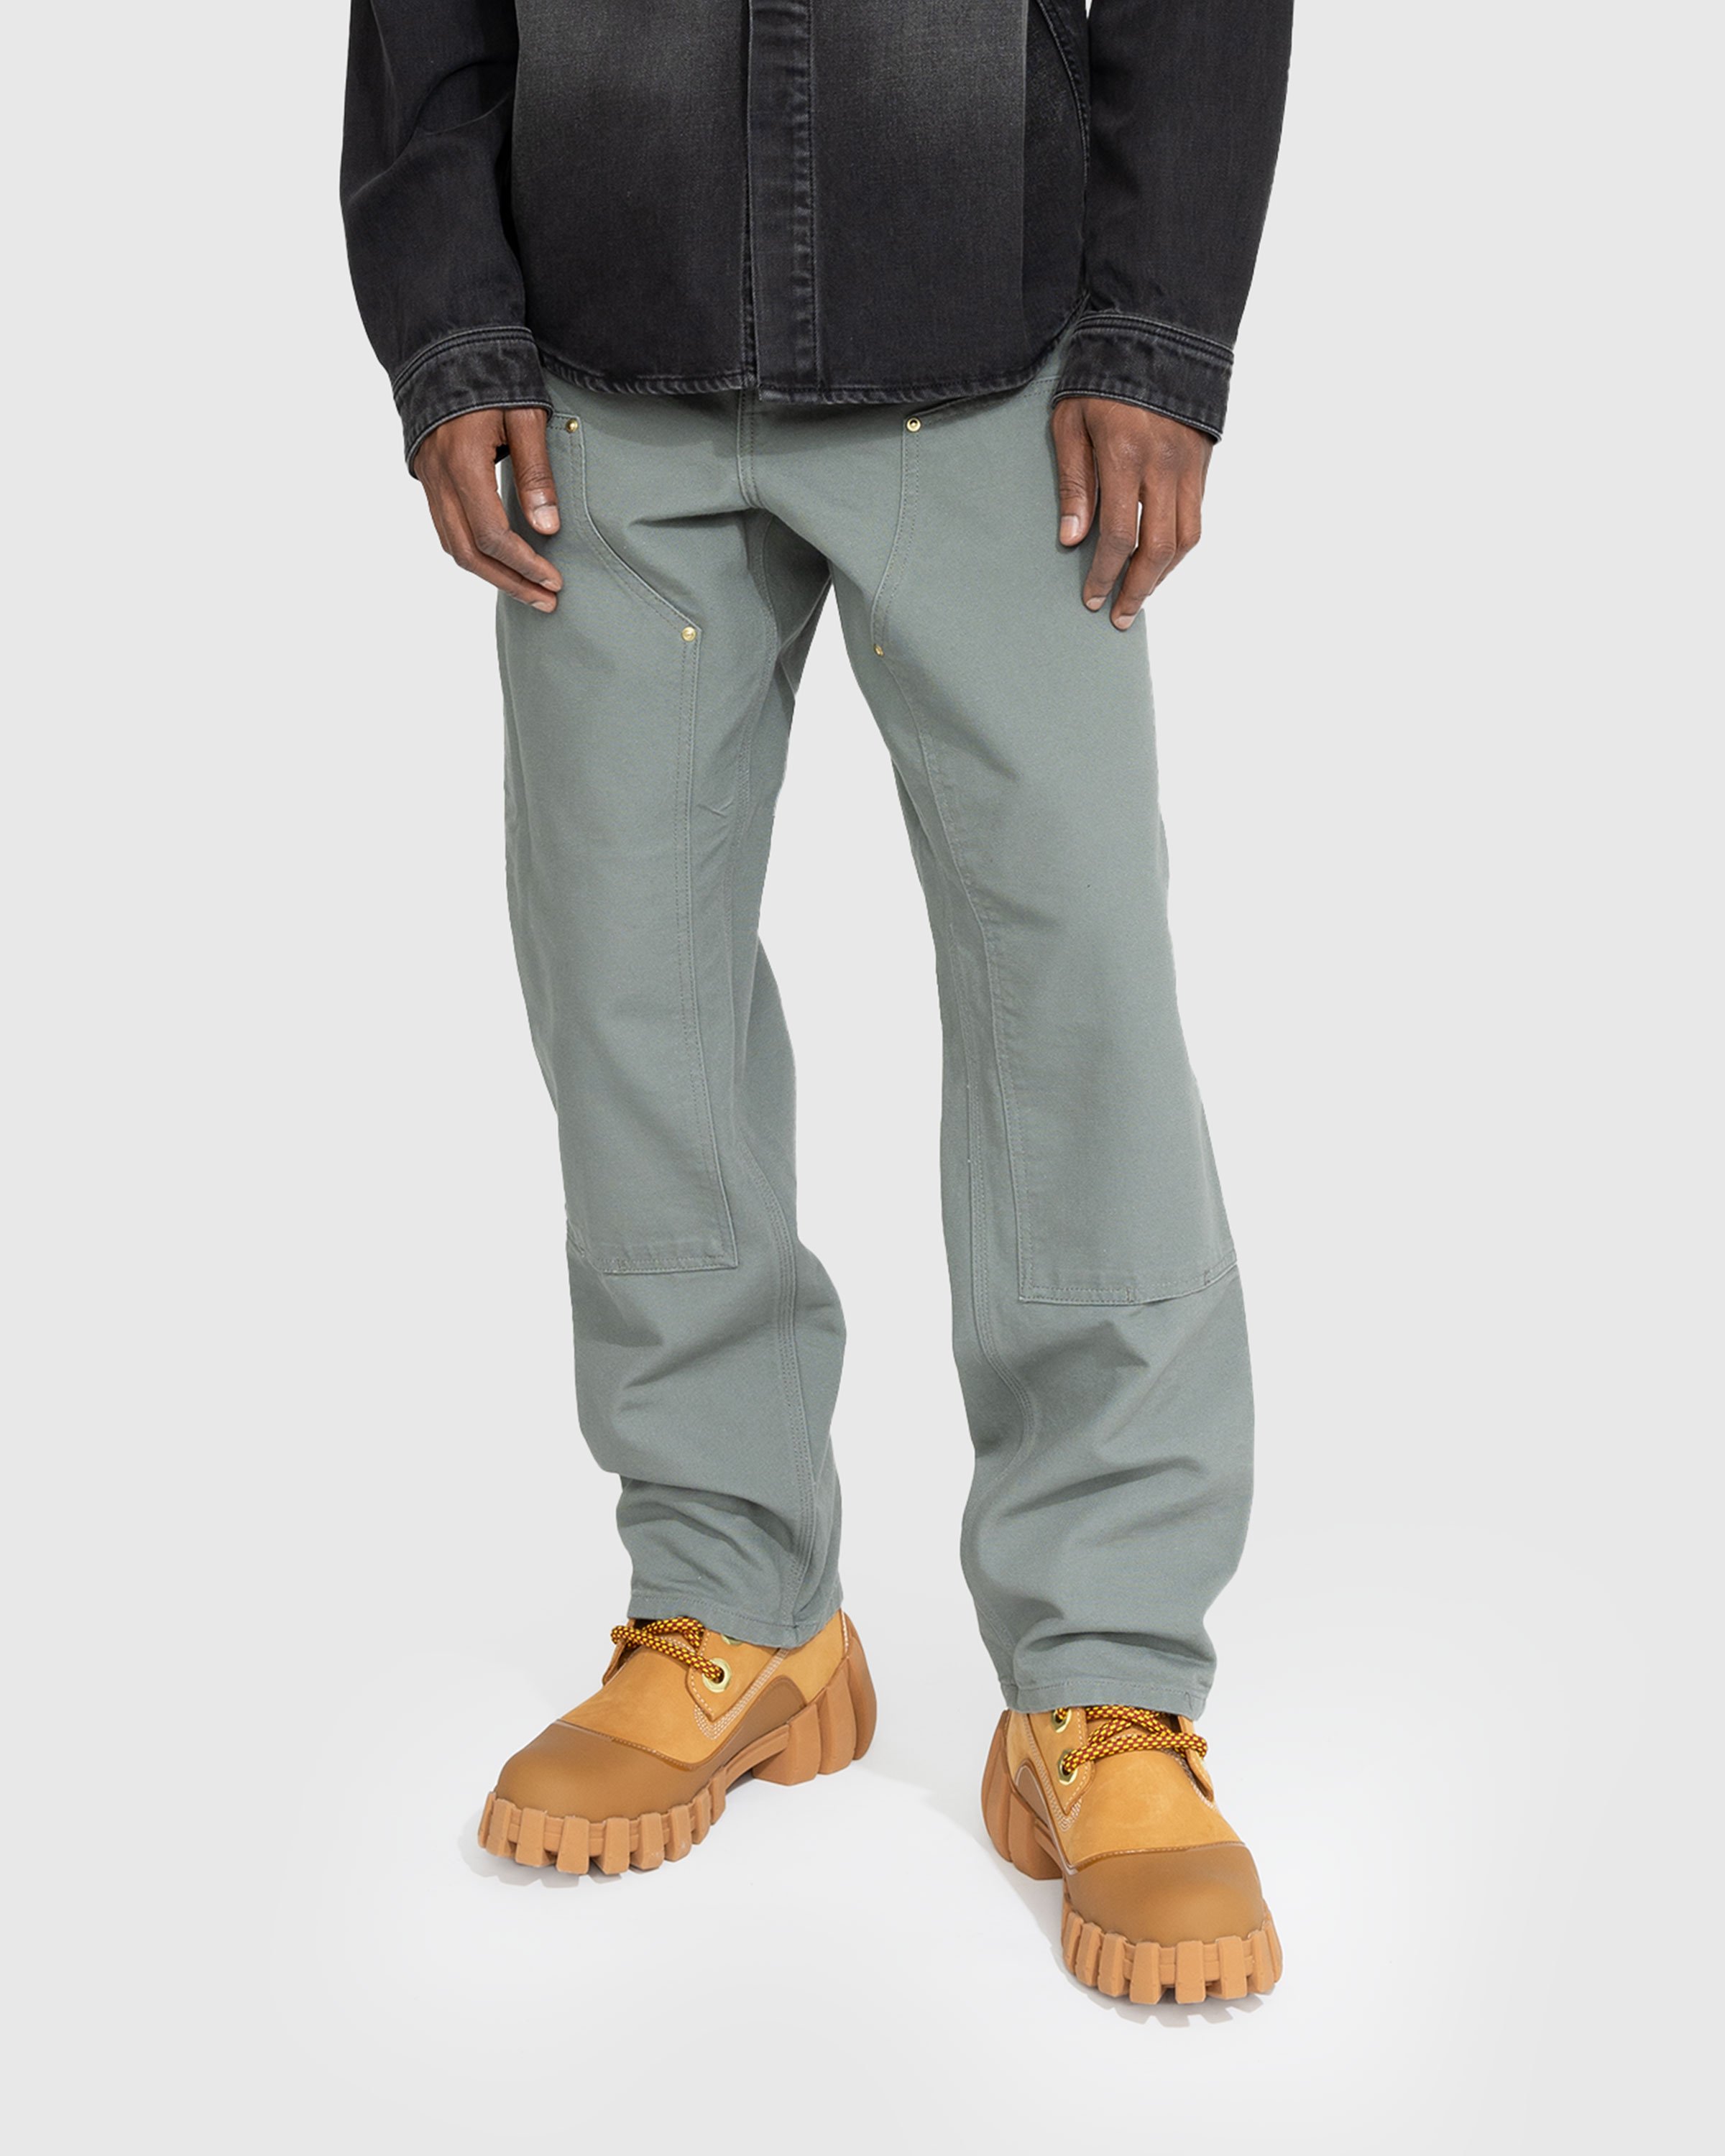 Carhartt WIP - Double Knee Pant Green - Clothing - Green - Image 2